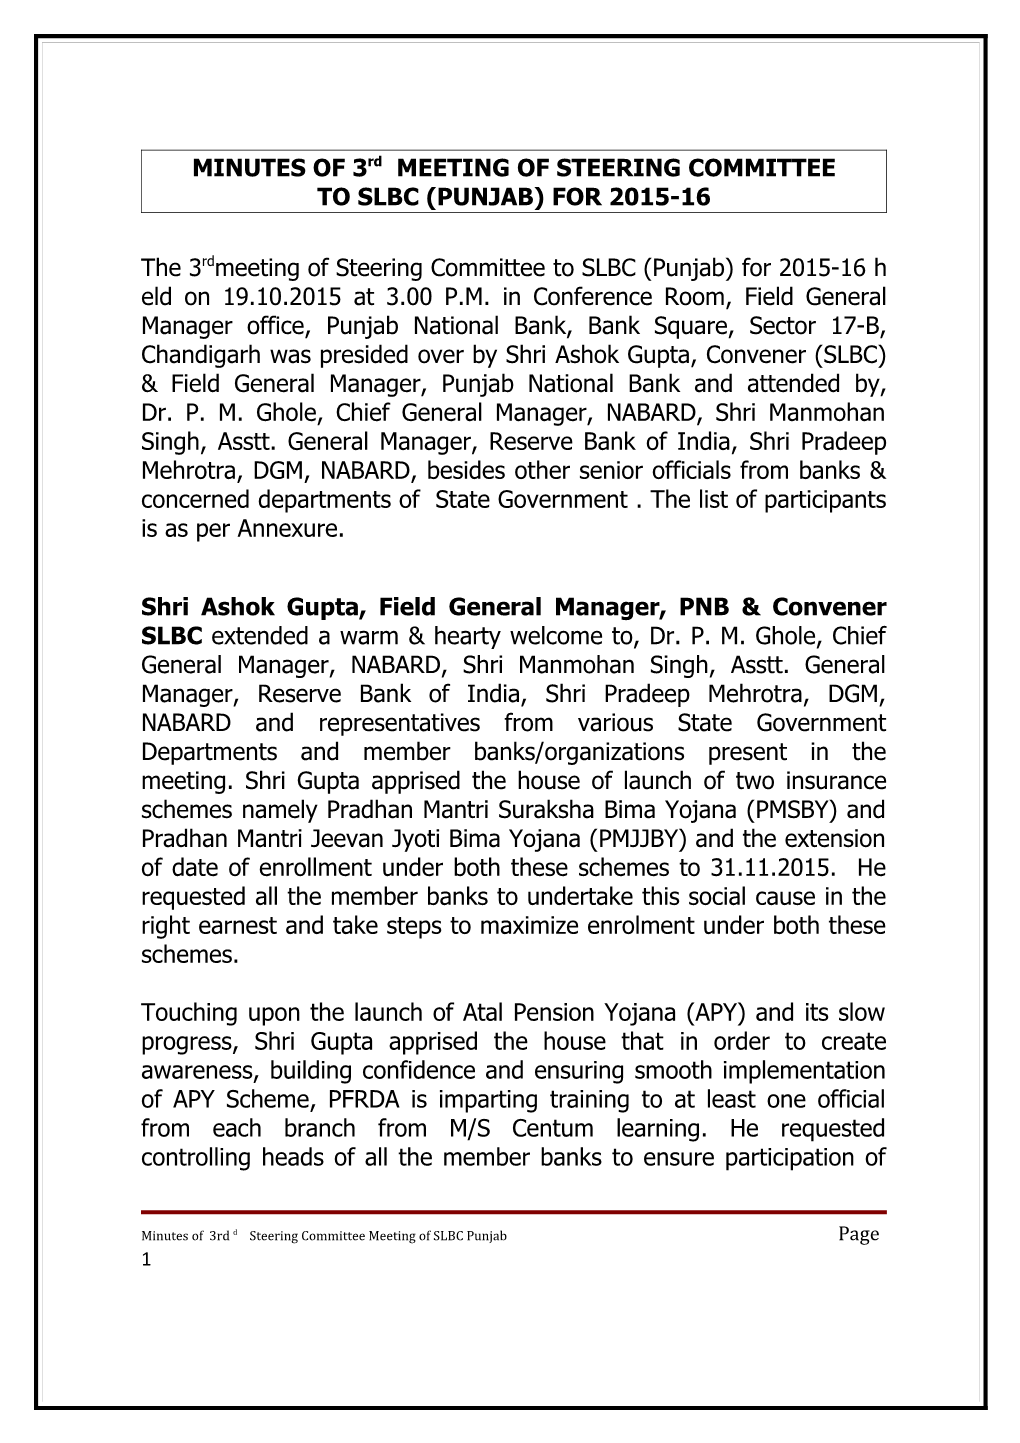 The 4Th Meeting of Steering Committee of SLBC (Punjab) for the Year 2005-06 Would Be Held